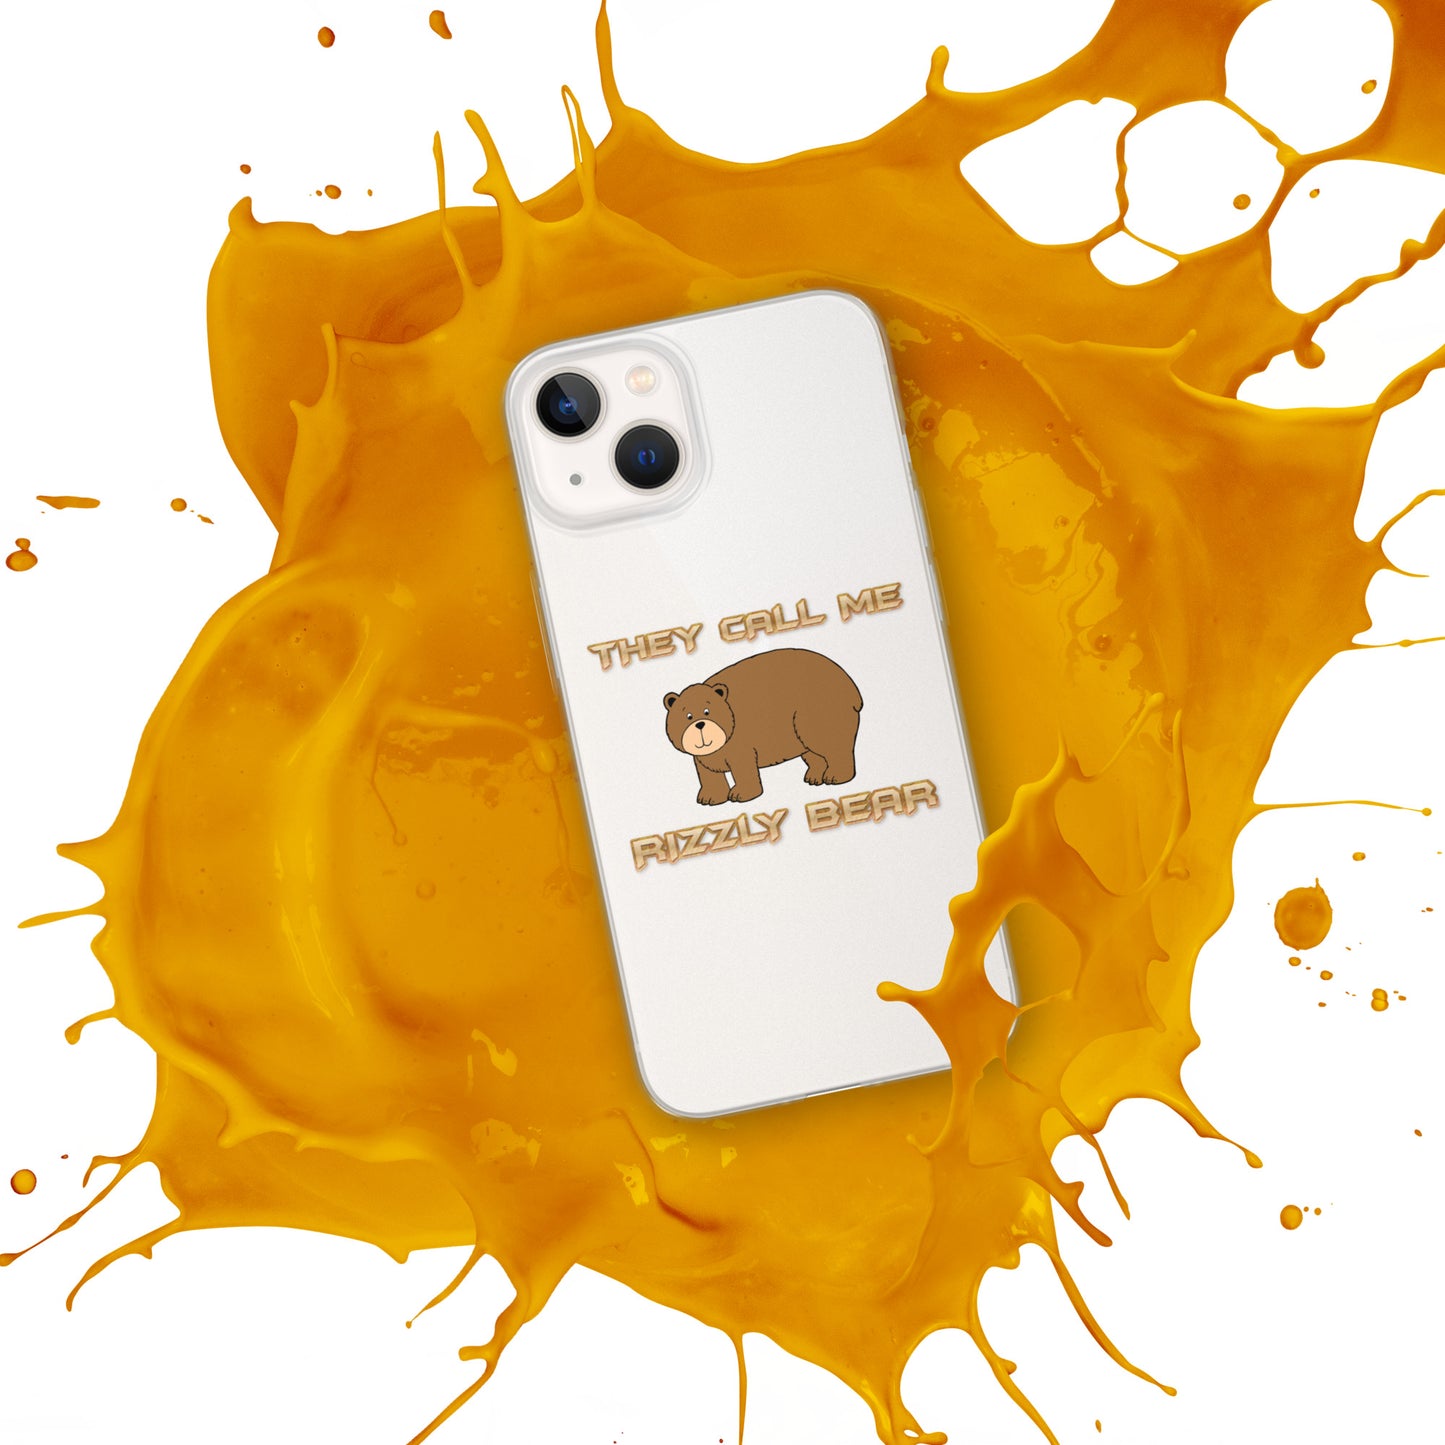 Rizzly Bear iPhone Case